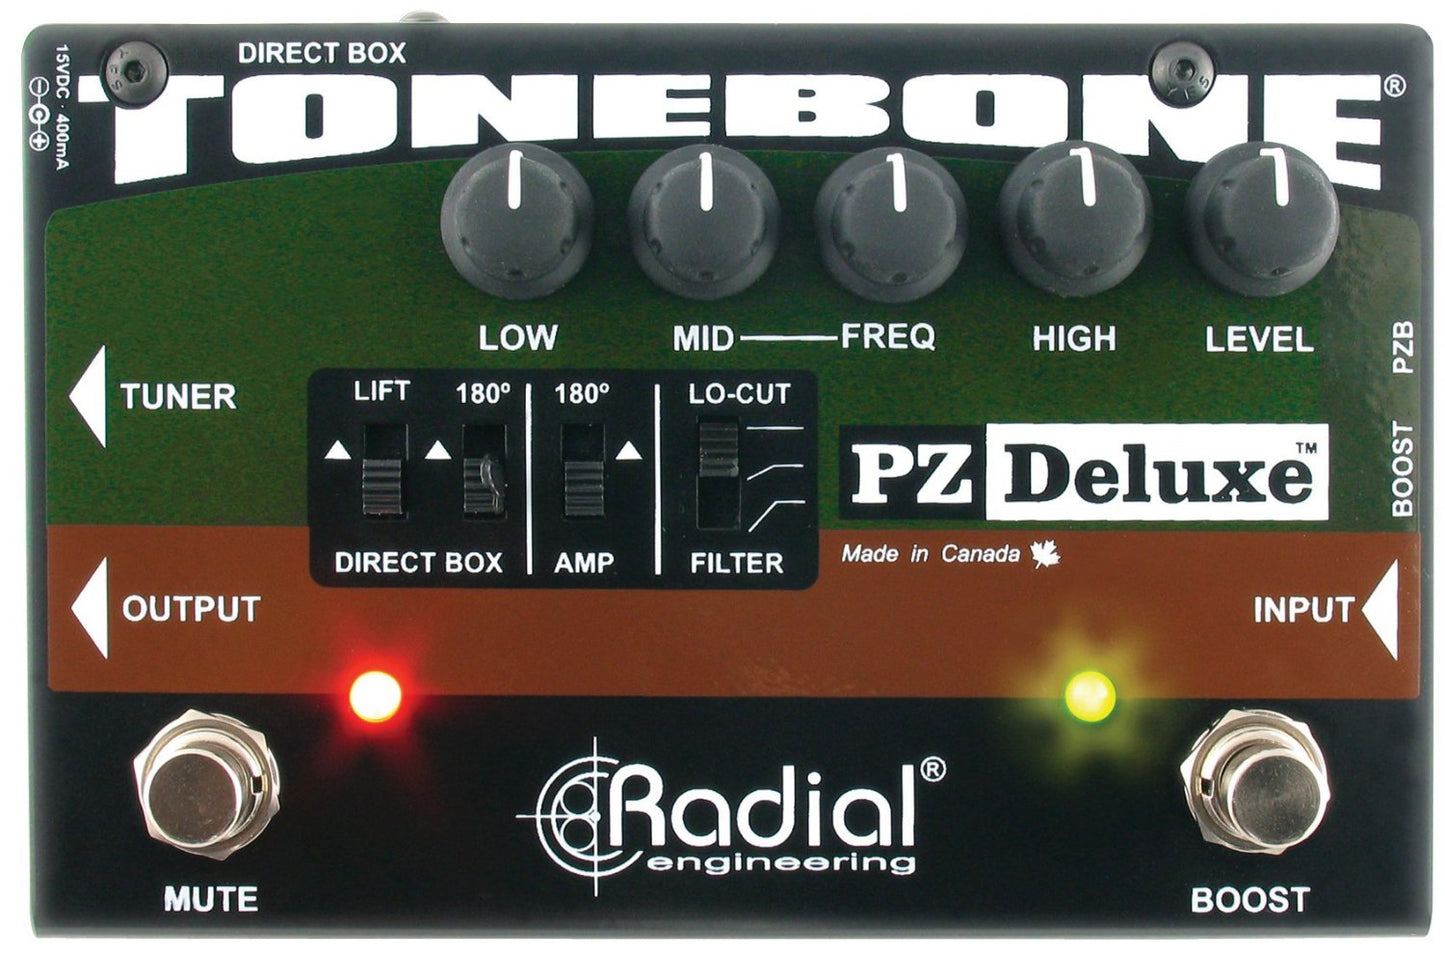 Radial PZDELUXE Radical Tonebone PZ Deluxe Acoustic Instrument Preamp